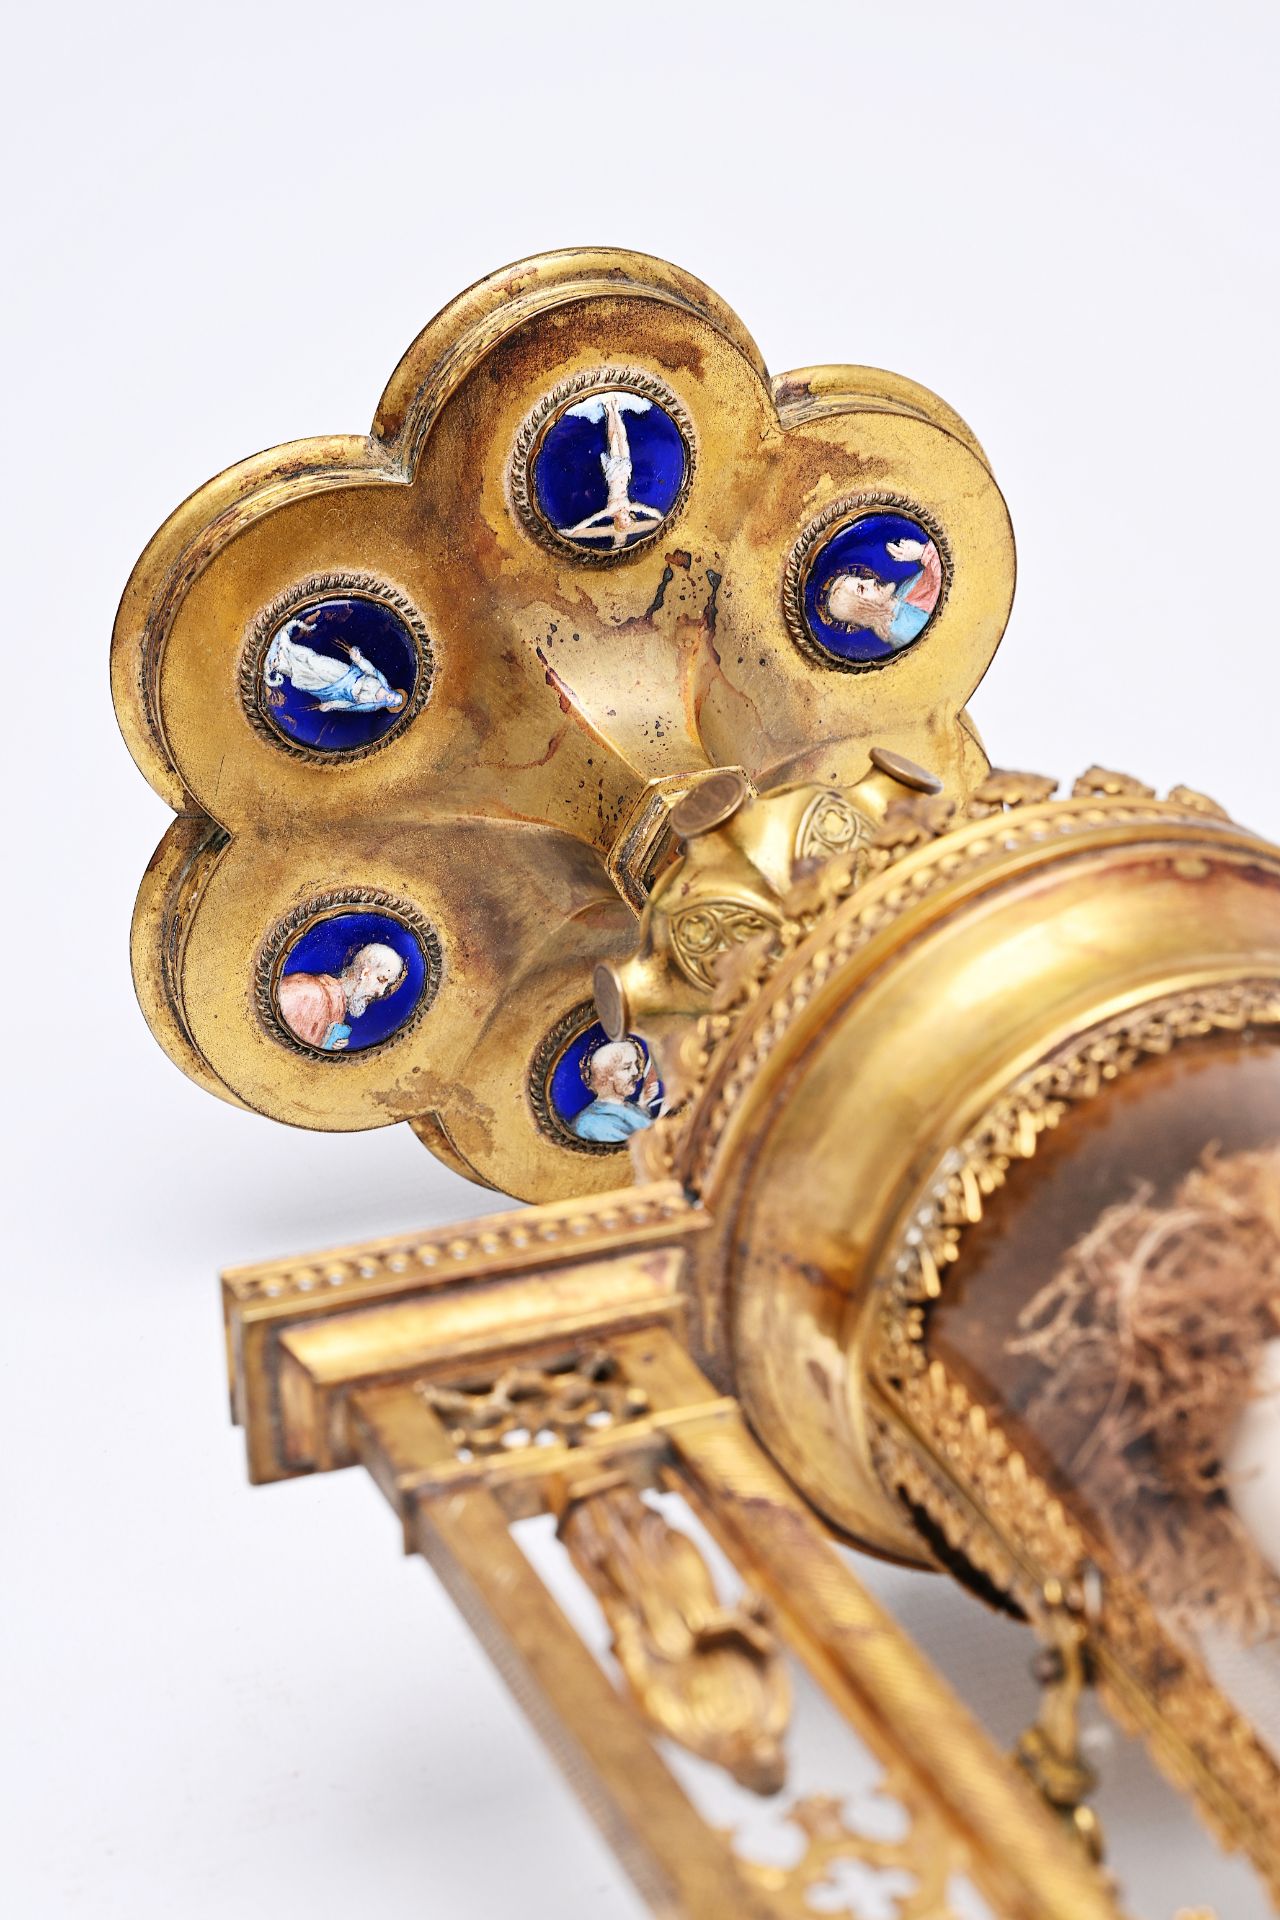 A French Gothic revival brass cathedral-shaped monstrance with enamel plaques, 19th C. - Image 15 of 15